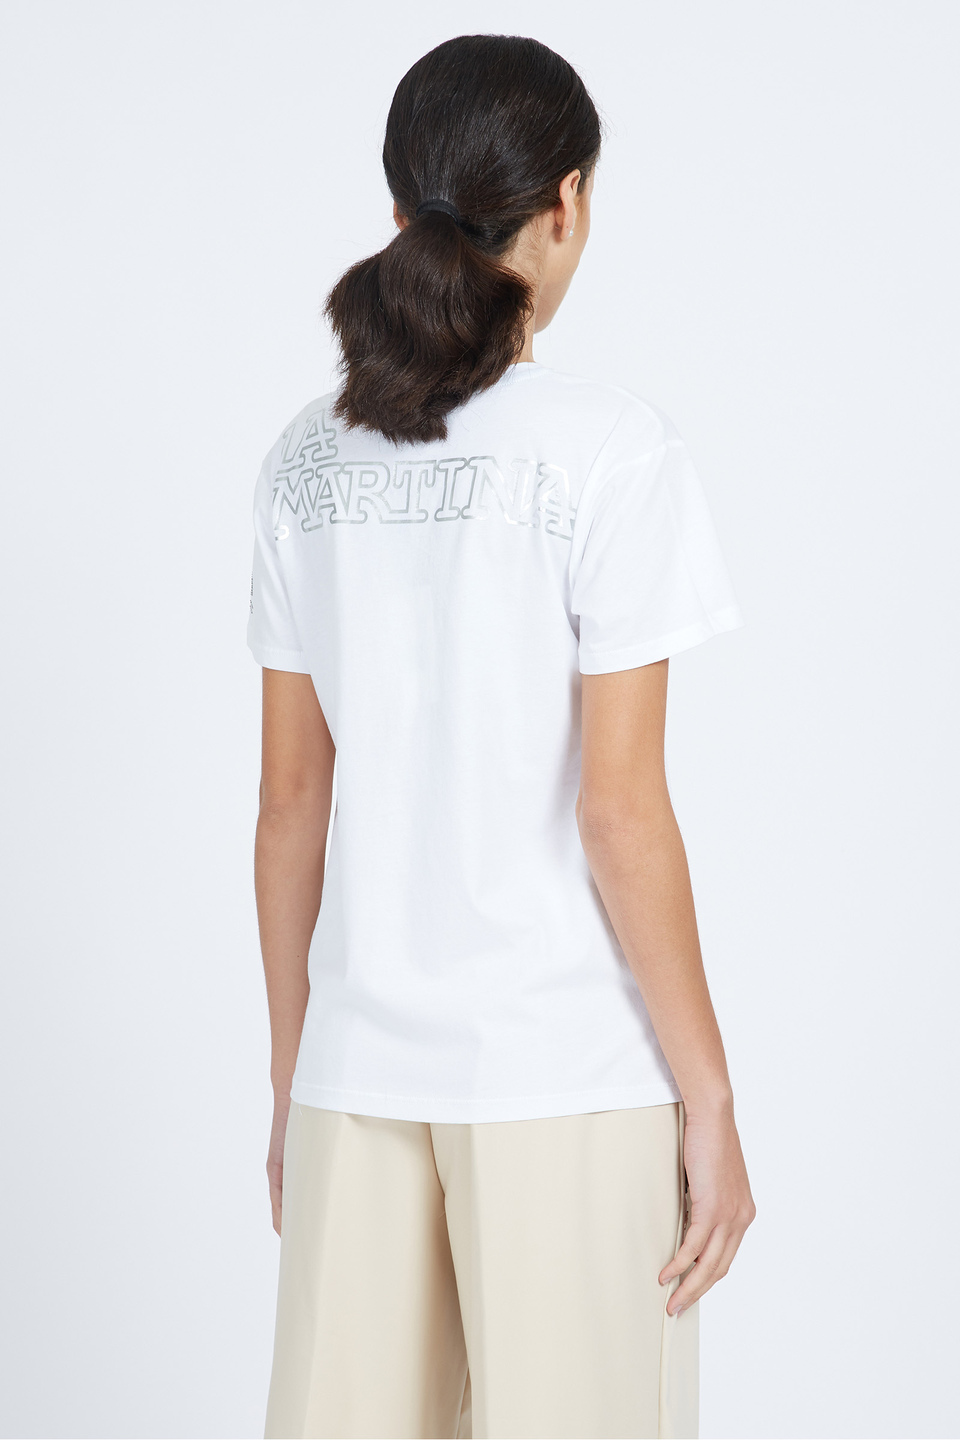 Women's short-sleeved t-shirt in 100% cotton - Vicky | La Martina - Official Online Shop